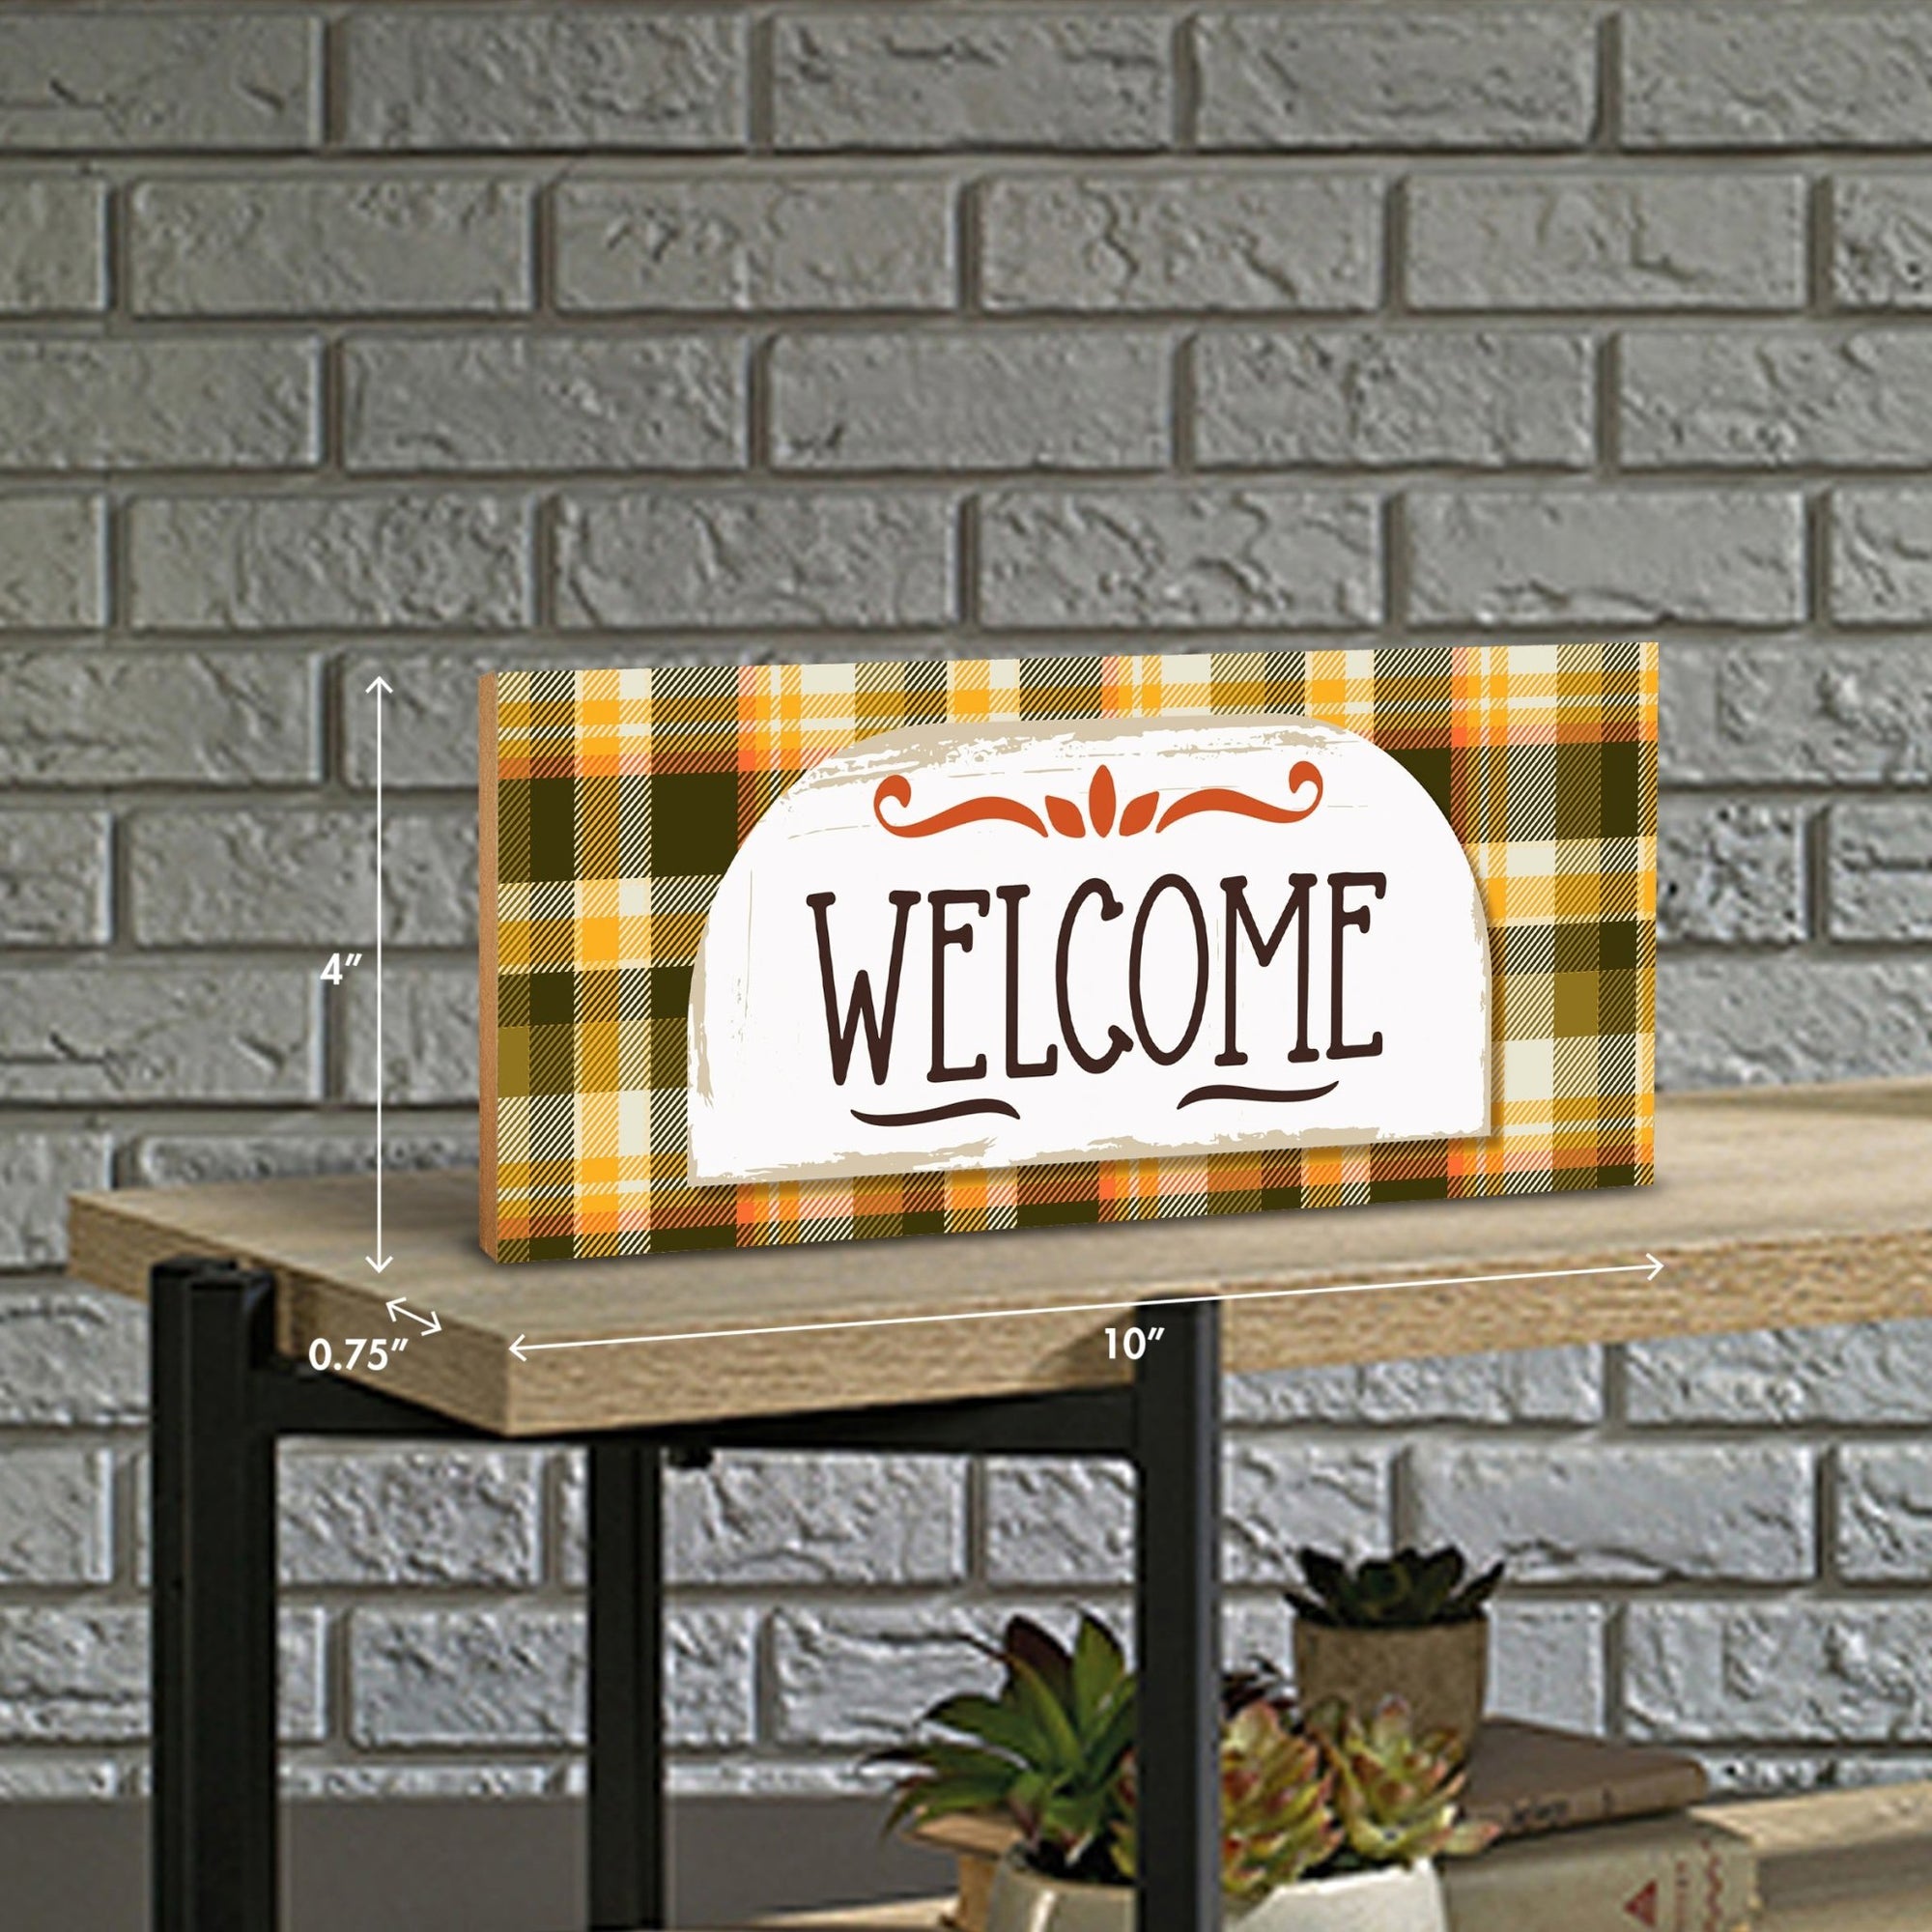 Fall Themed Unique Shelf Décor and Tabletop Signs for Home Decor - LifeSong Milestones